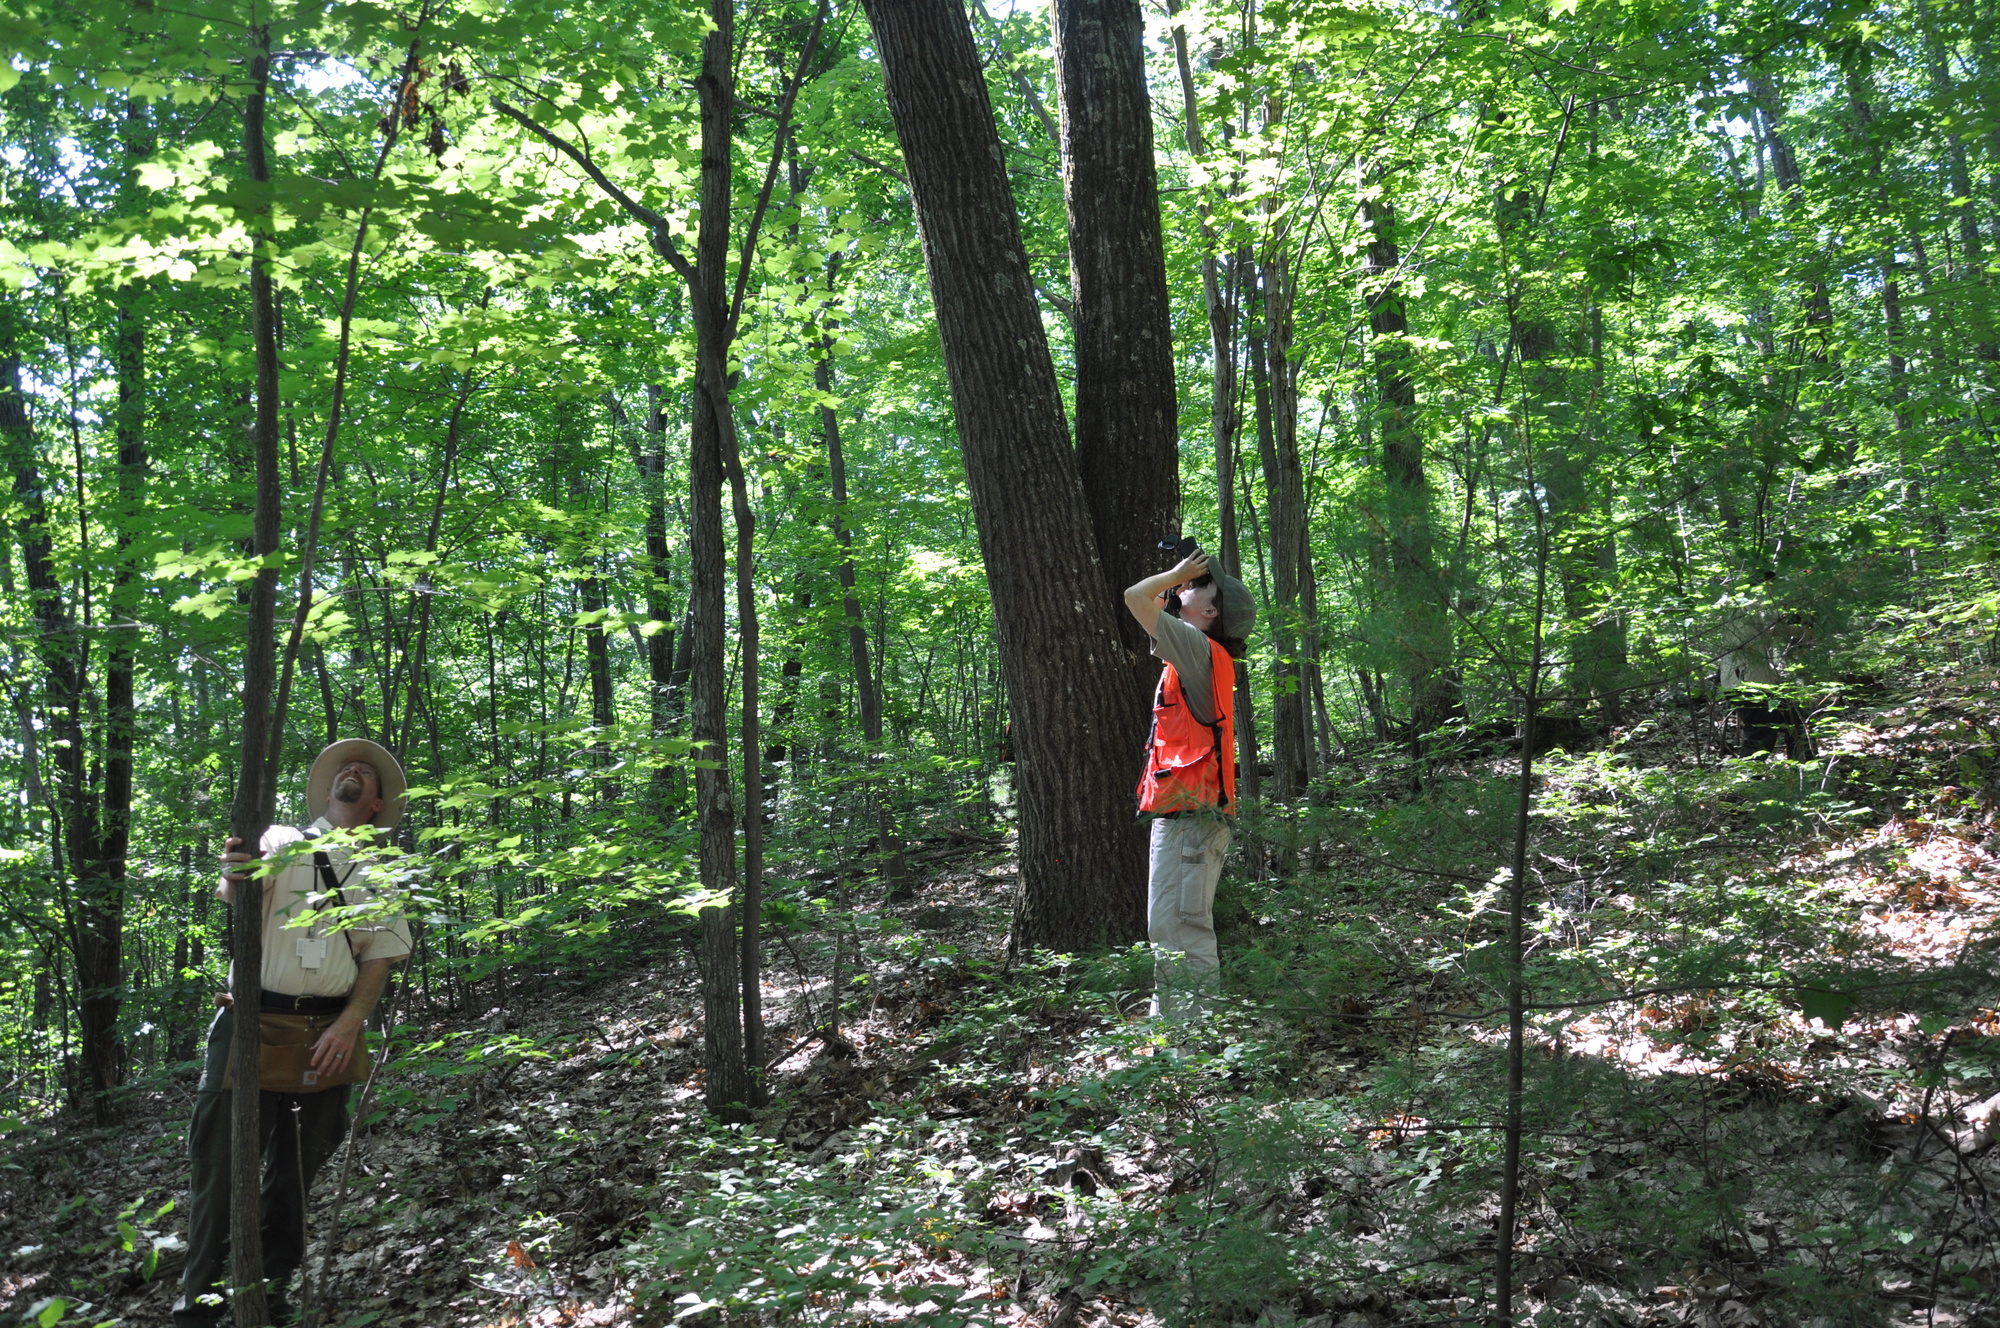 Employees in forested area surveying trees for Asian longhorned beetle